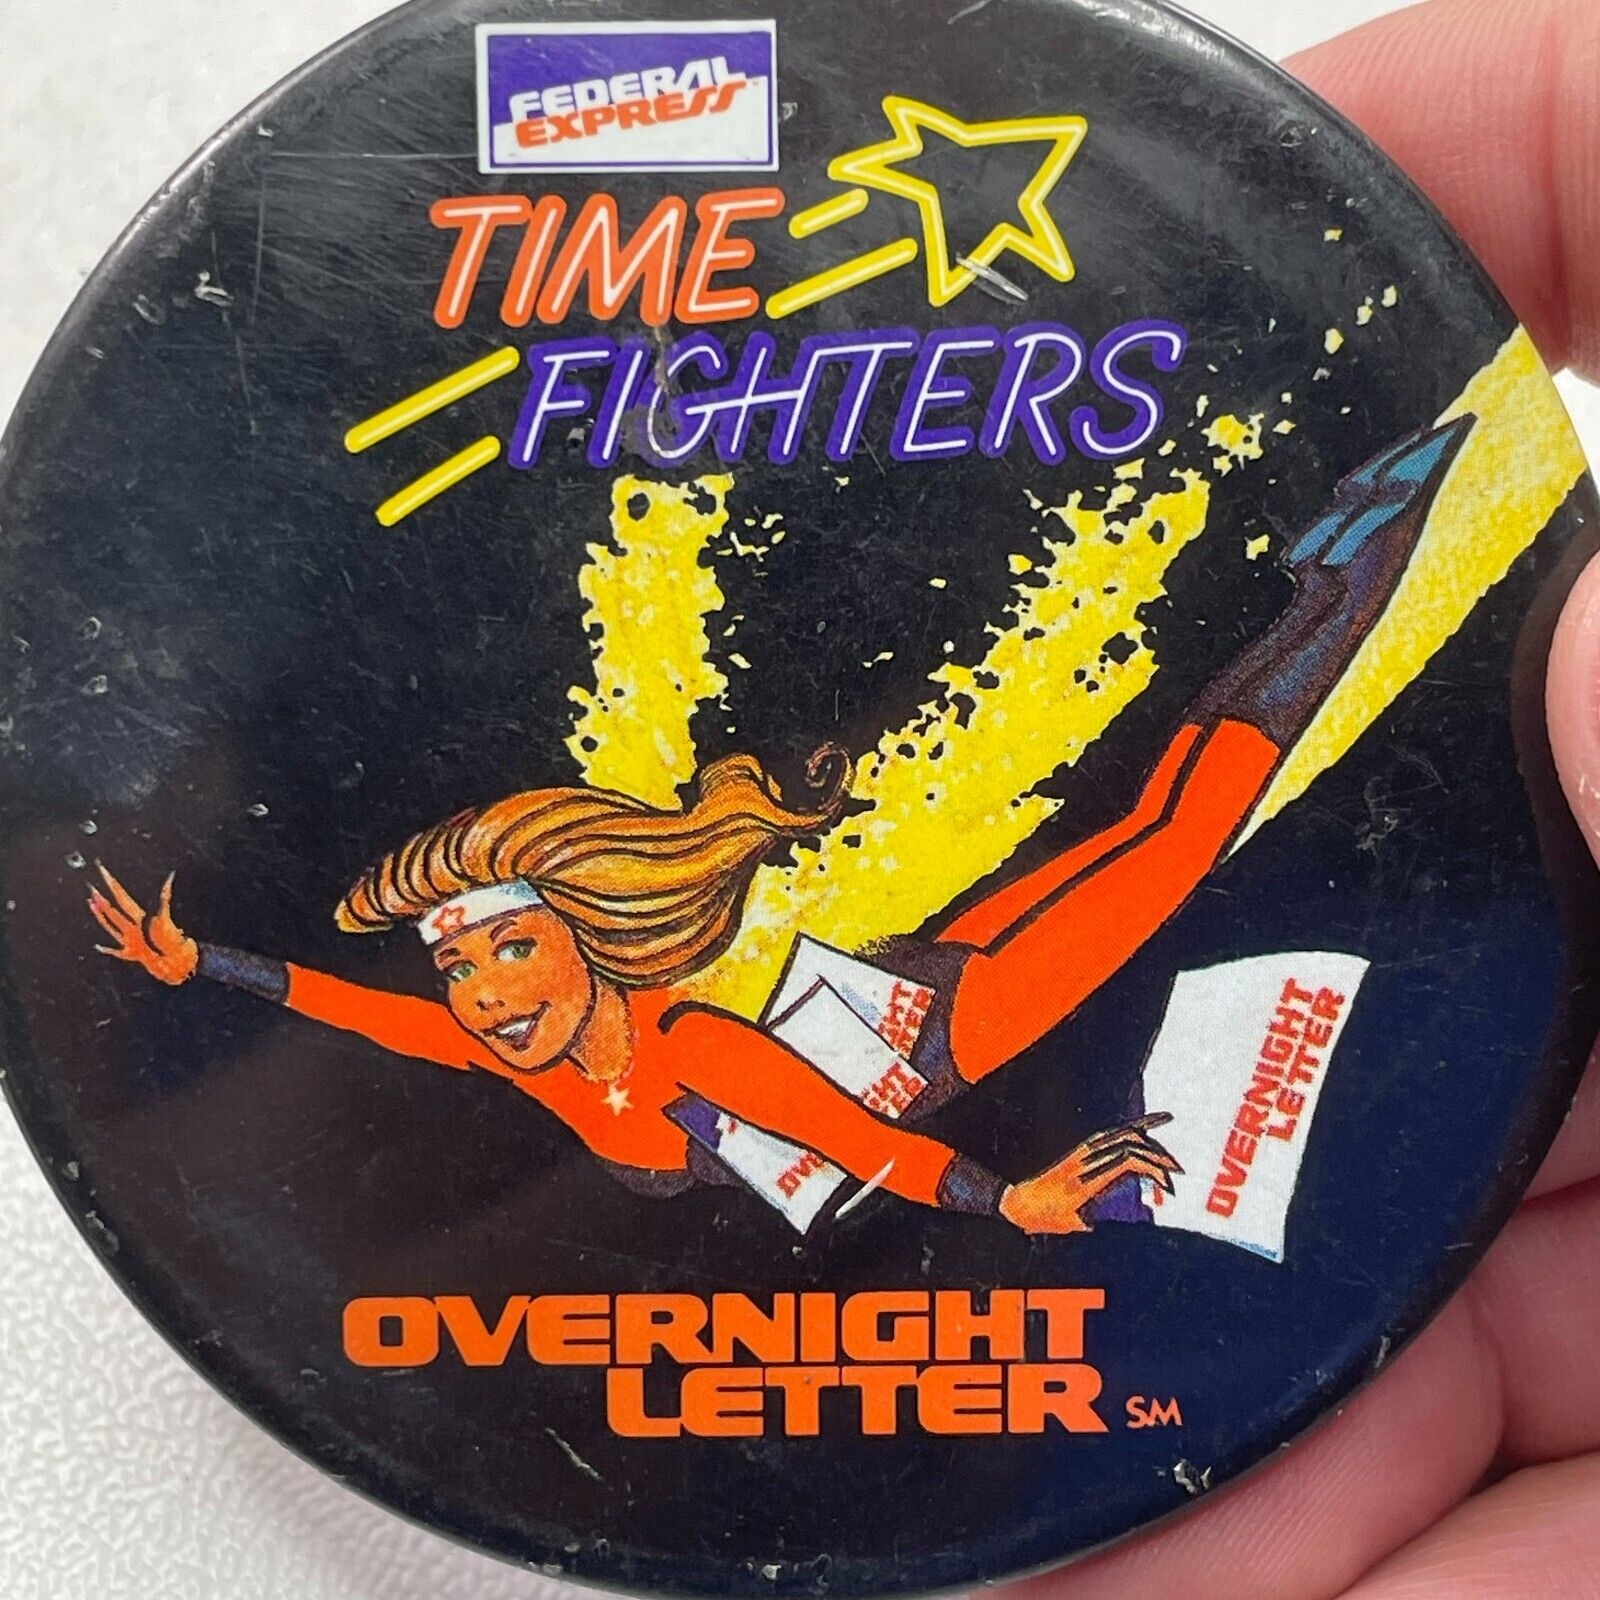 Girl Airplane Federal Express TIME FIGHTERS Overnight Letter Pinback Button 251D